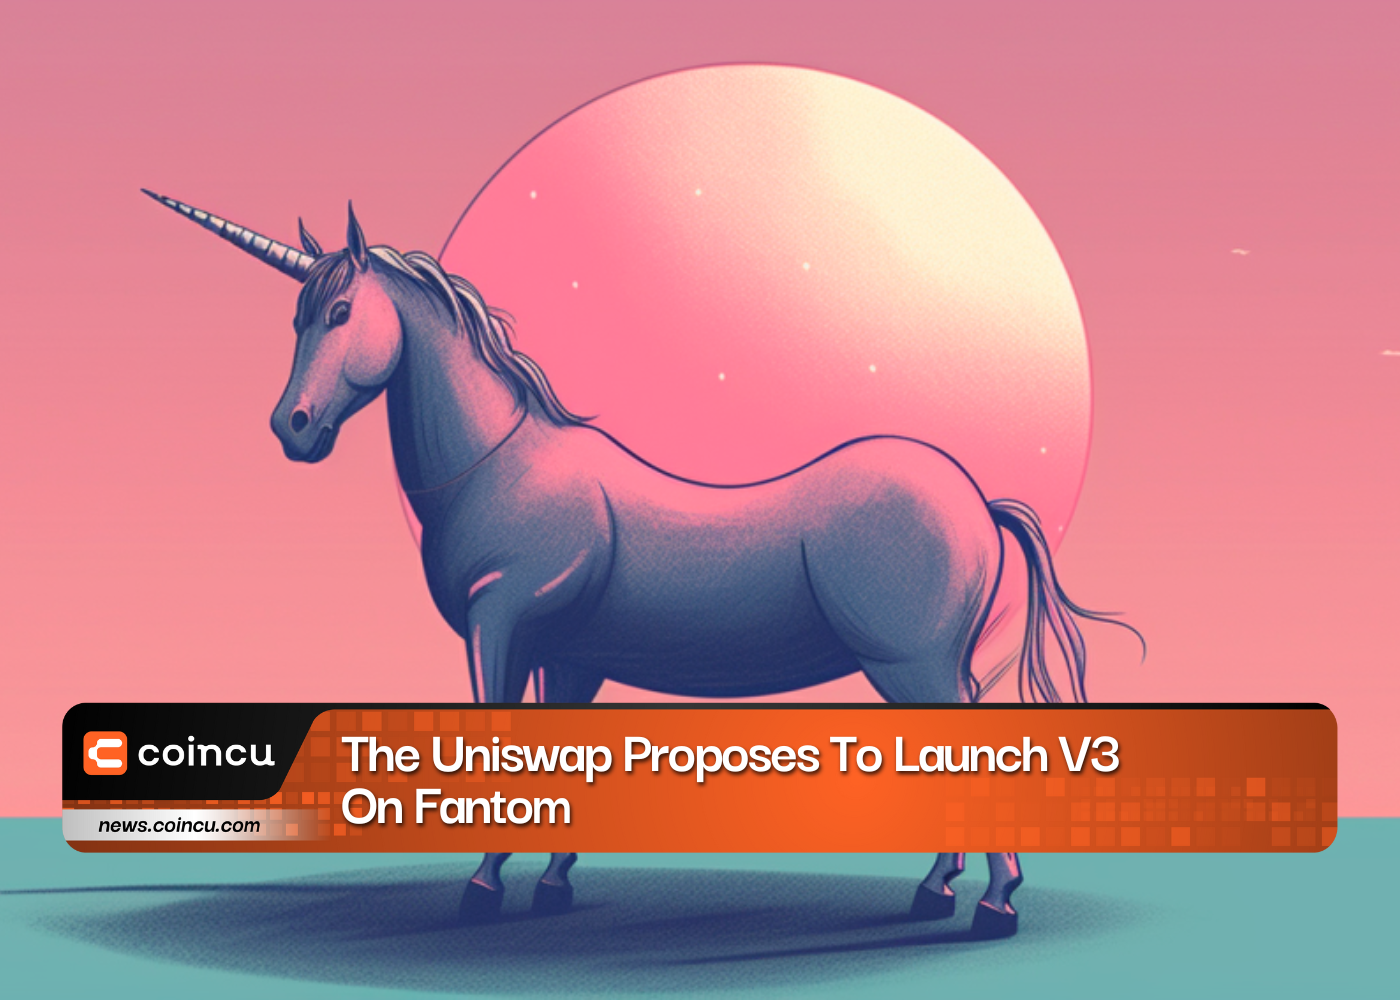 The Uniswap Proposes To Launch V3 On Fantom